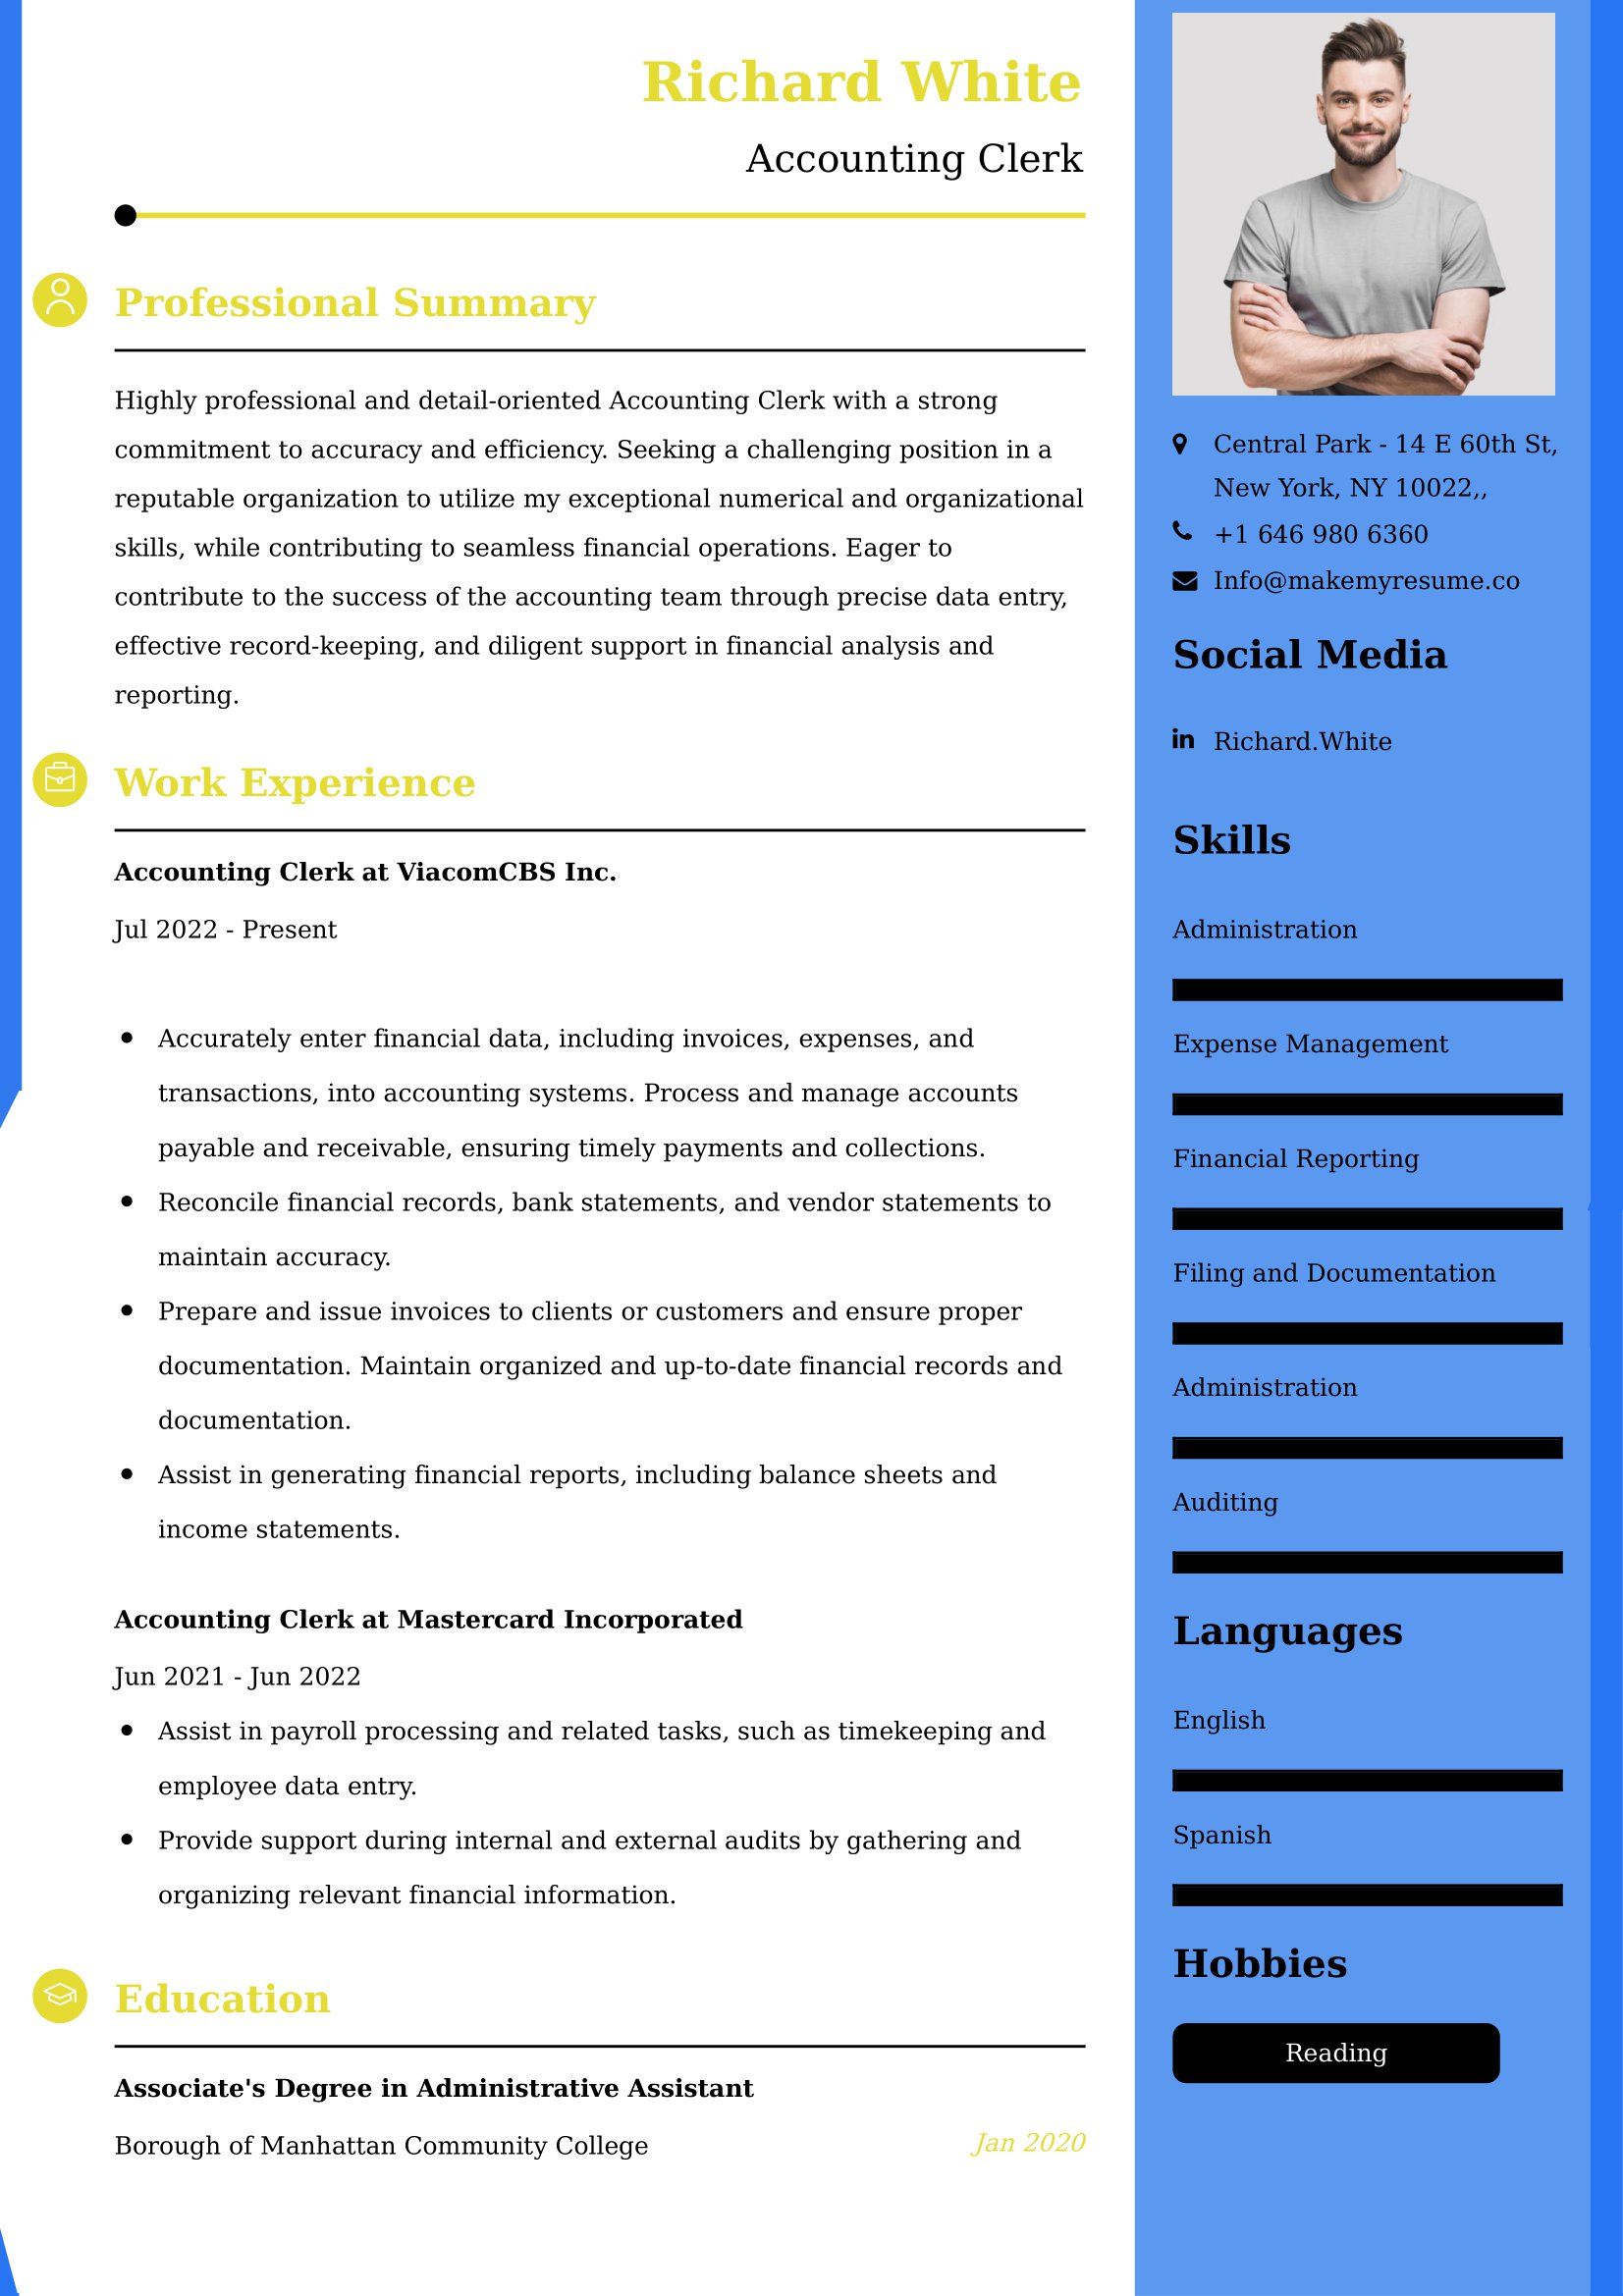 Accounting Clerk Resume Examples - UK Format, Latest Template.